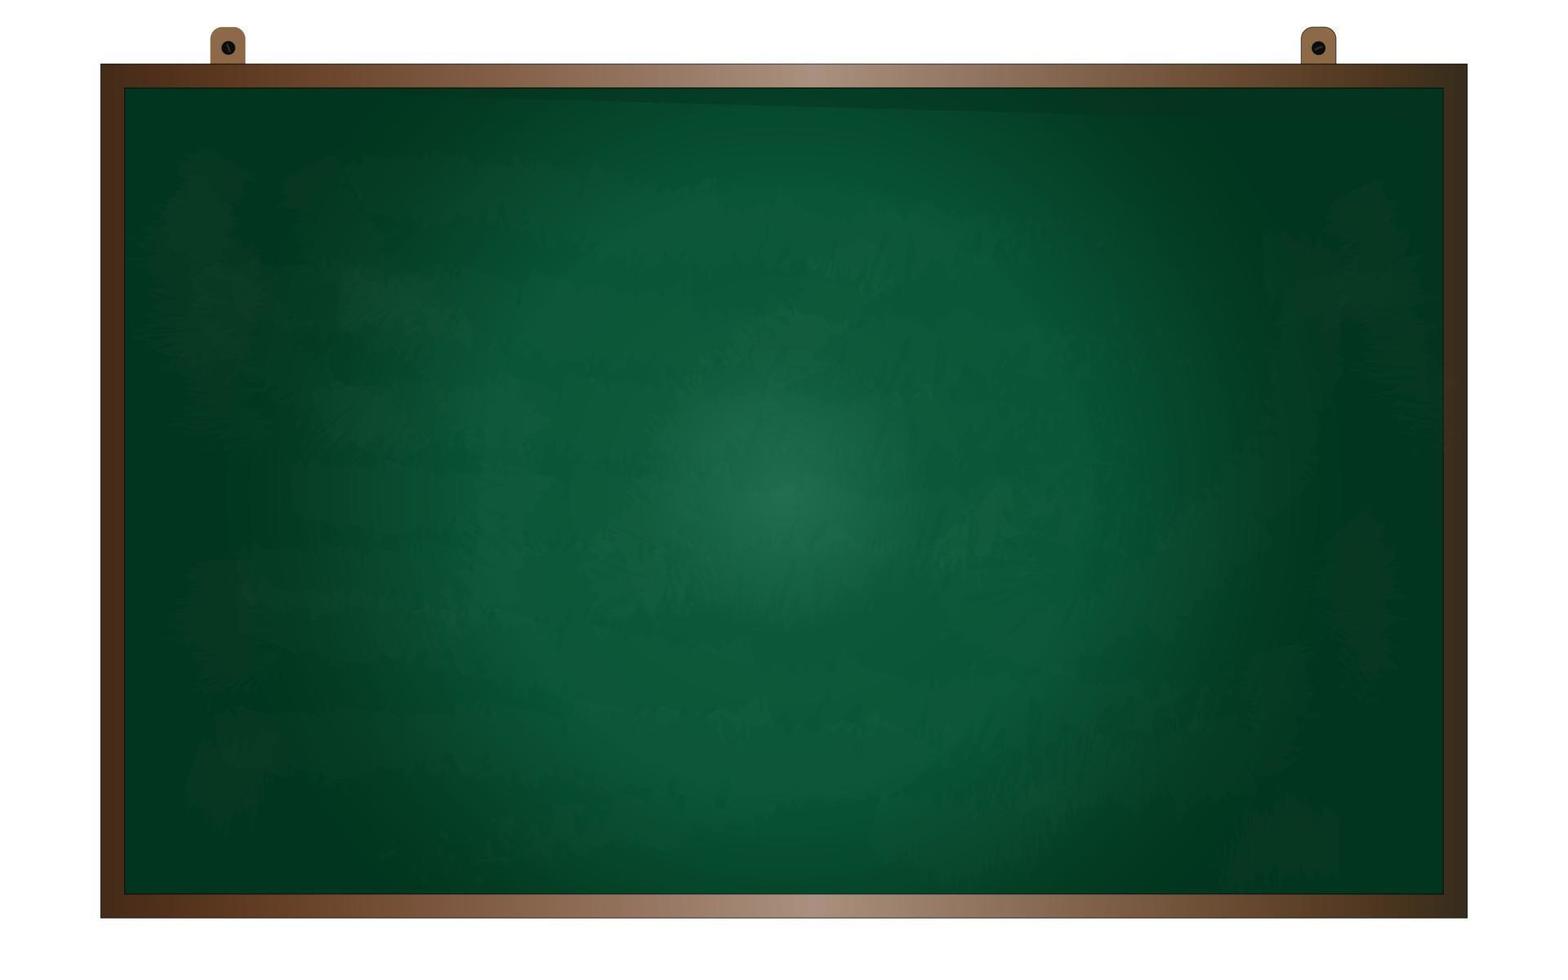 Green chalkboard background texture. Vector illustration or learning concept